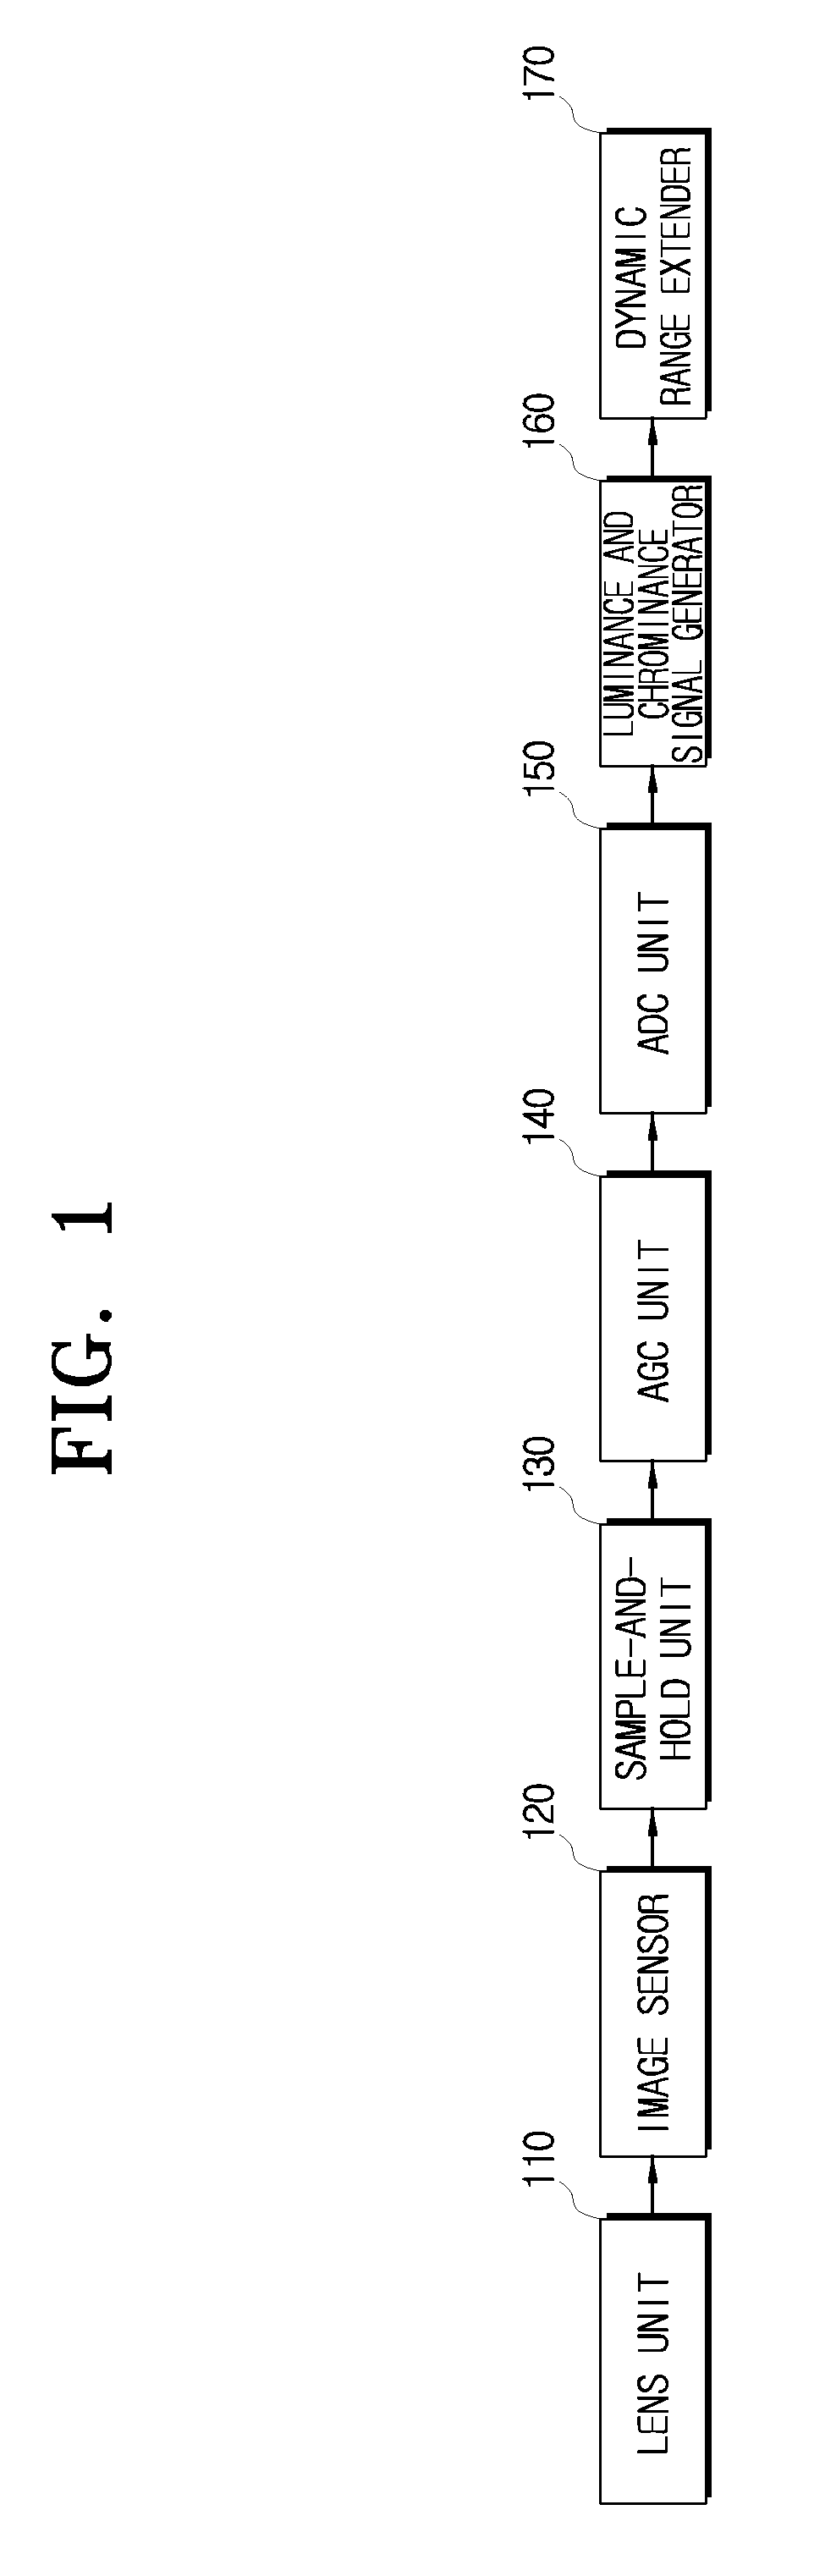 Image pickup apparatus and method for extending dynamic range thereof